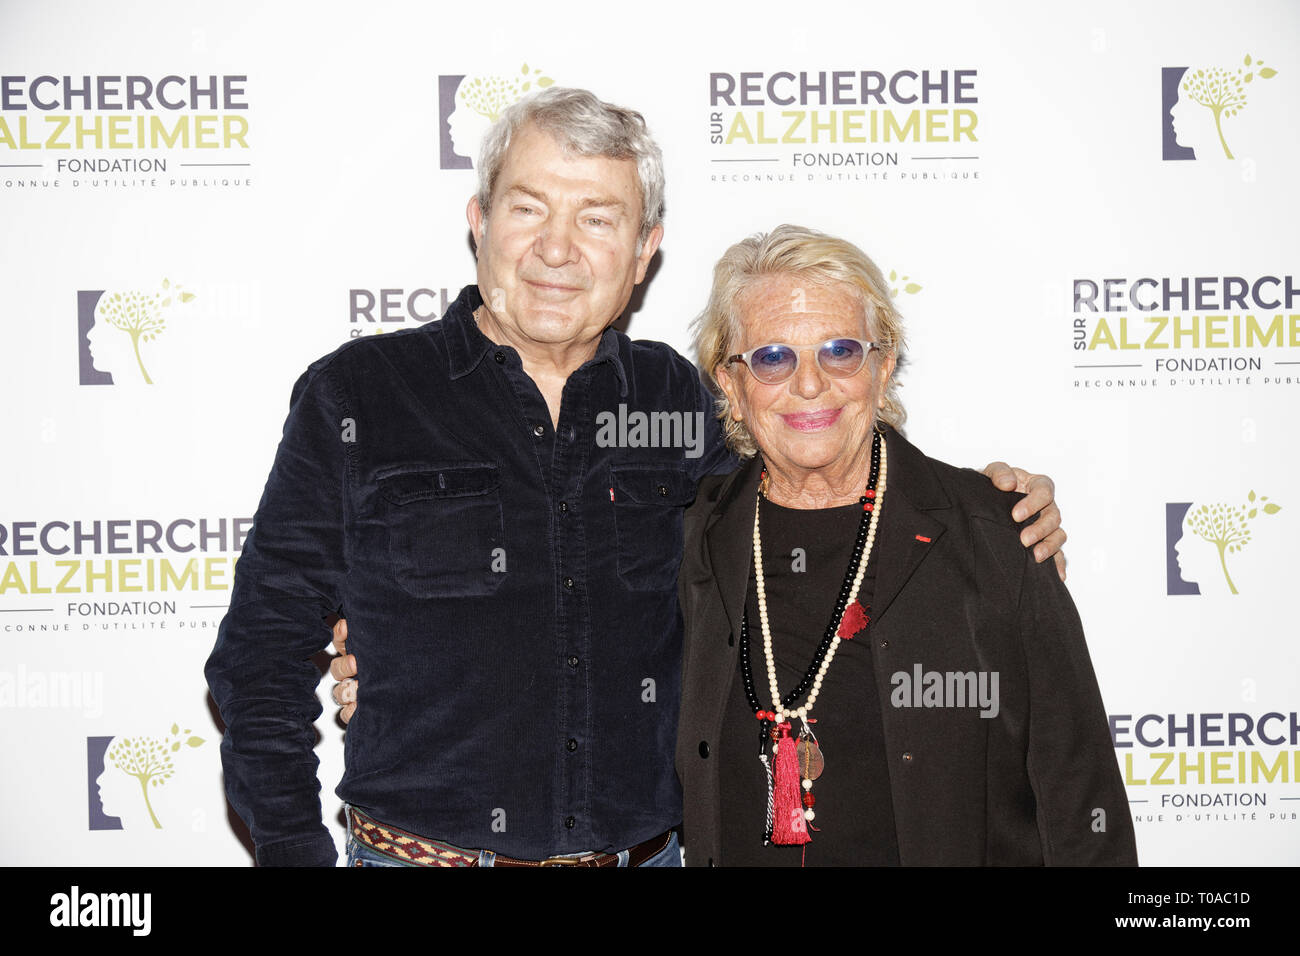 Paris, France. 18th Mar 2019. Martin Lamotte and Veronique de Villele (R) - Photocall of the 14th Gala 2019 of the Association for Alzheimer Research at the Olympia in Paris on March 18, 2019 Credit: Véronique PHITOUSSI/Alamy Live News Stock Photo